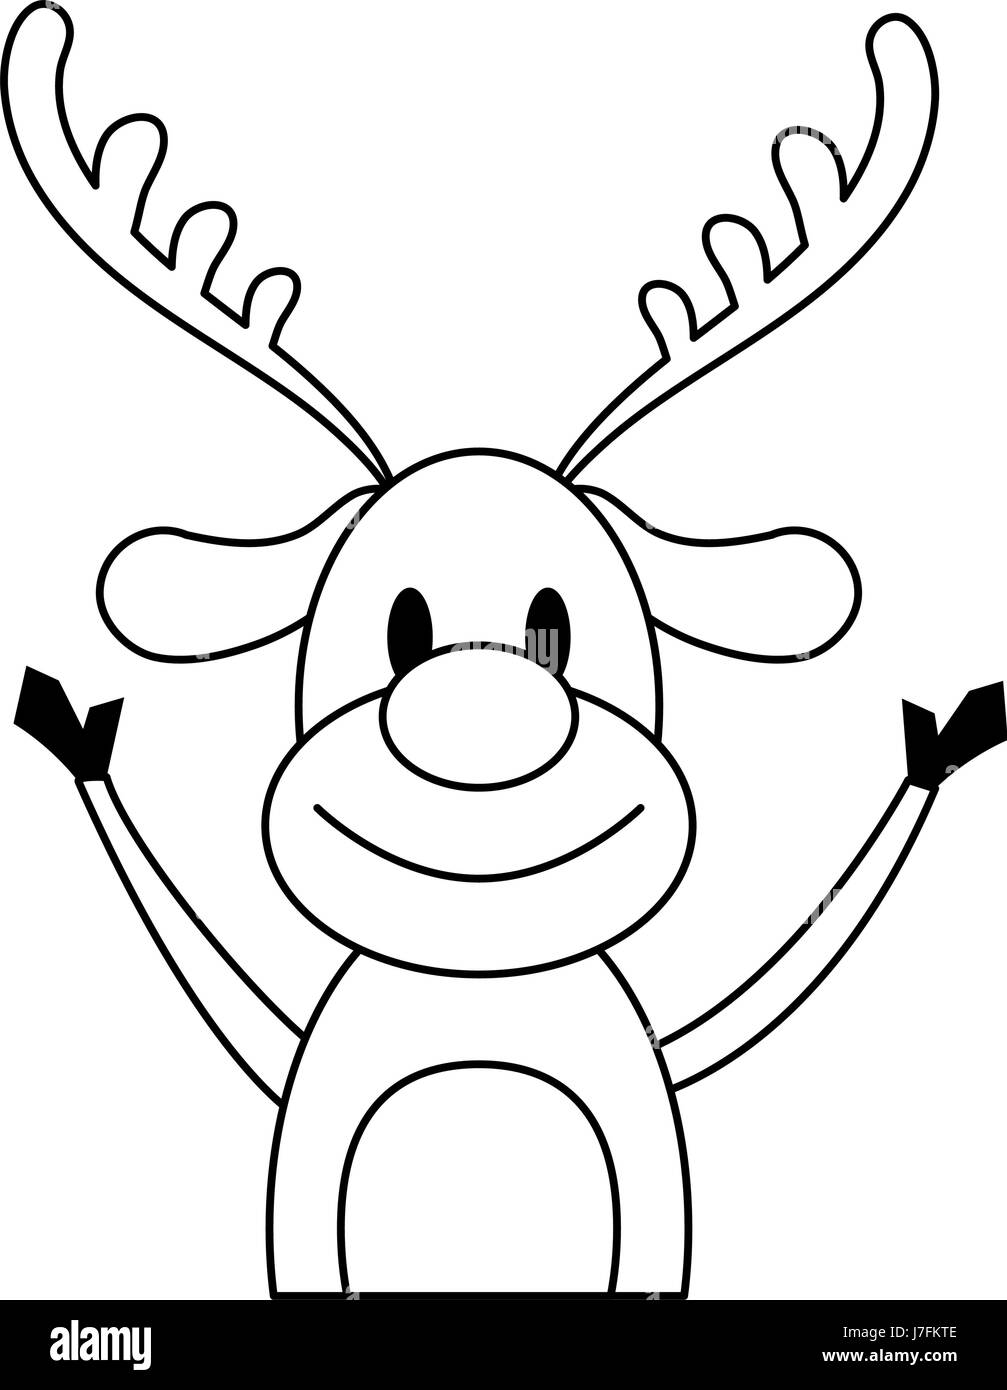 Rudolph the red nose Black and White Stock Photos & Images - Alamy